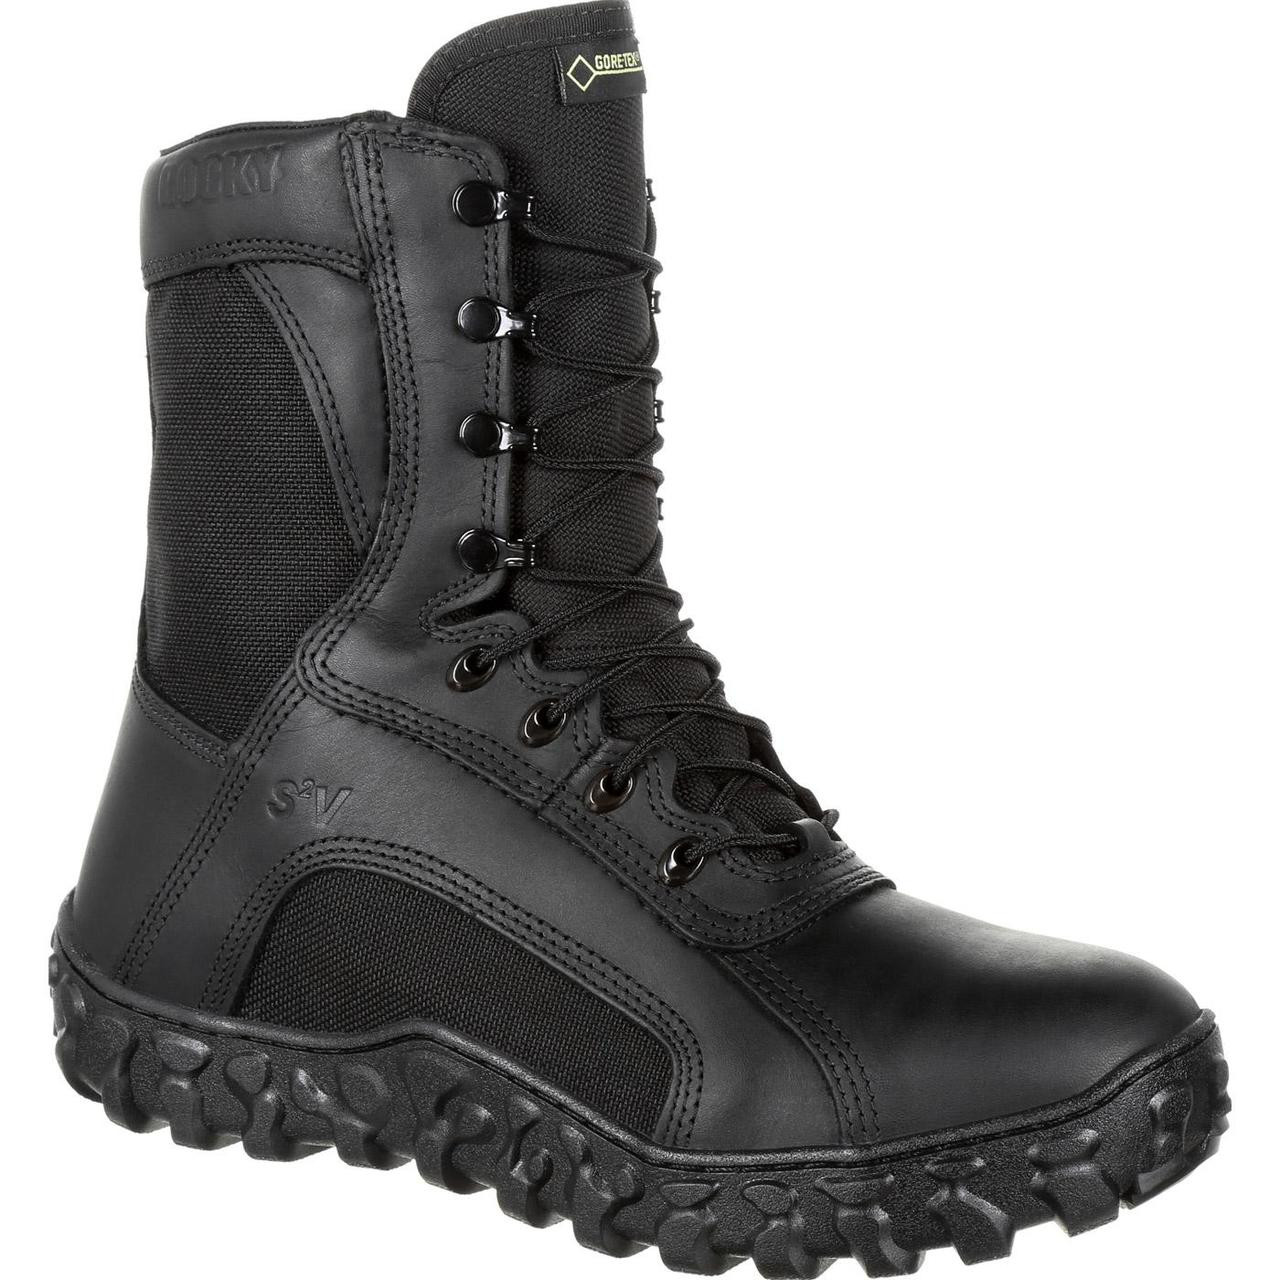 rocky s2v tactical military boot black